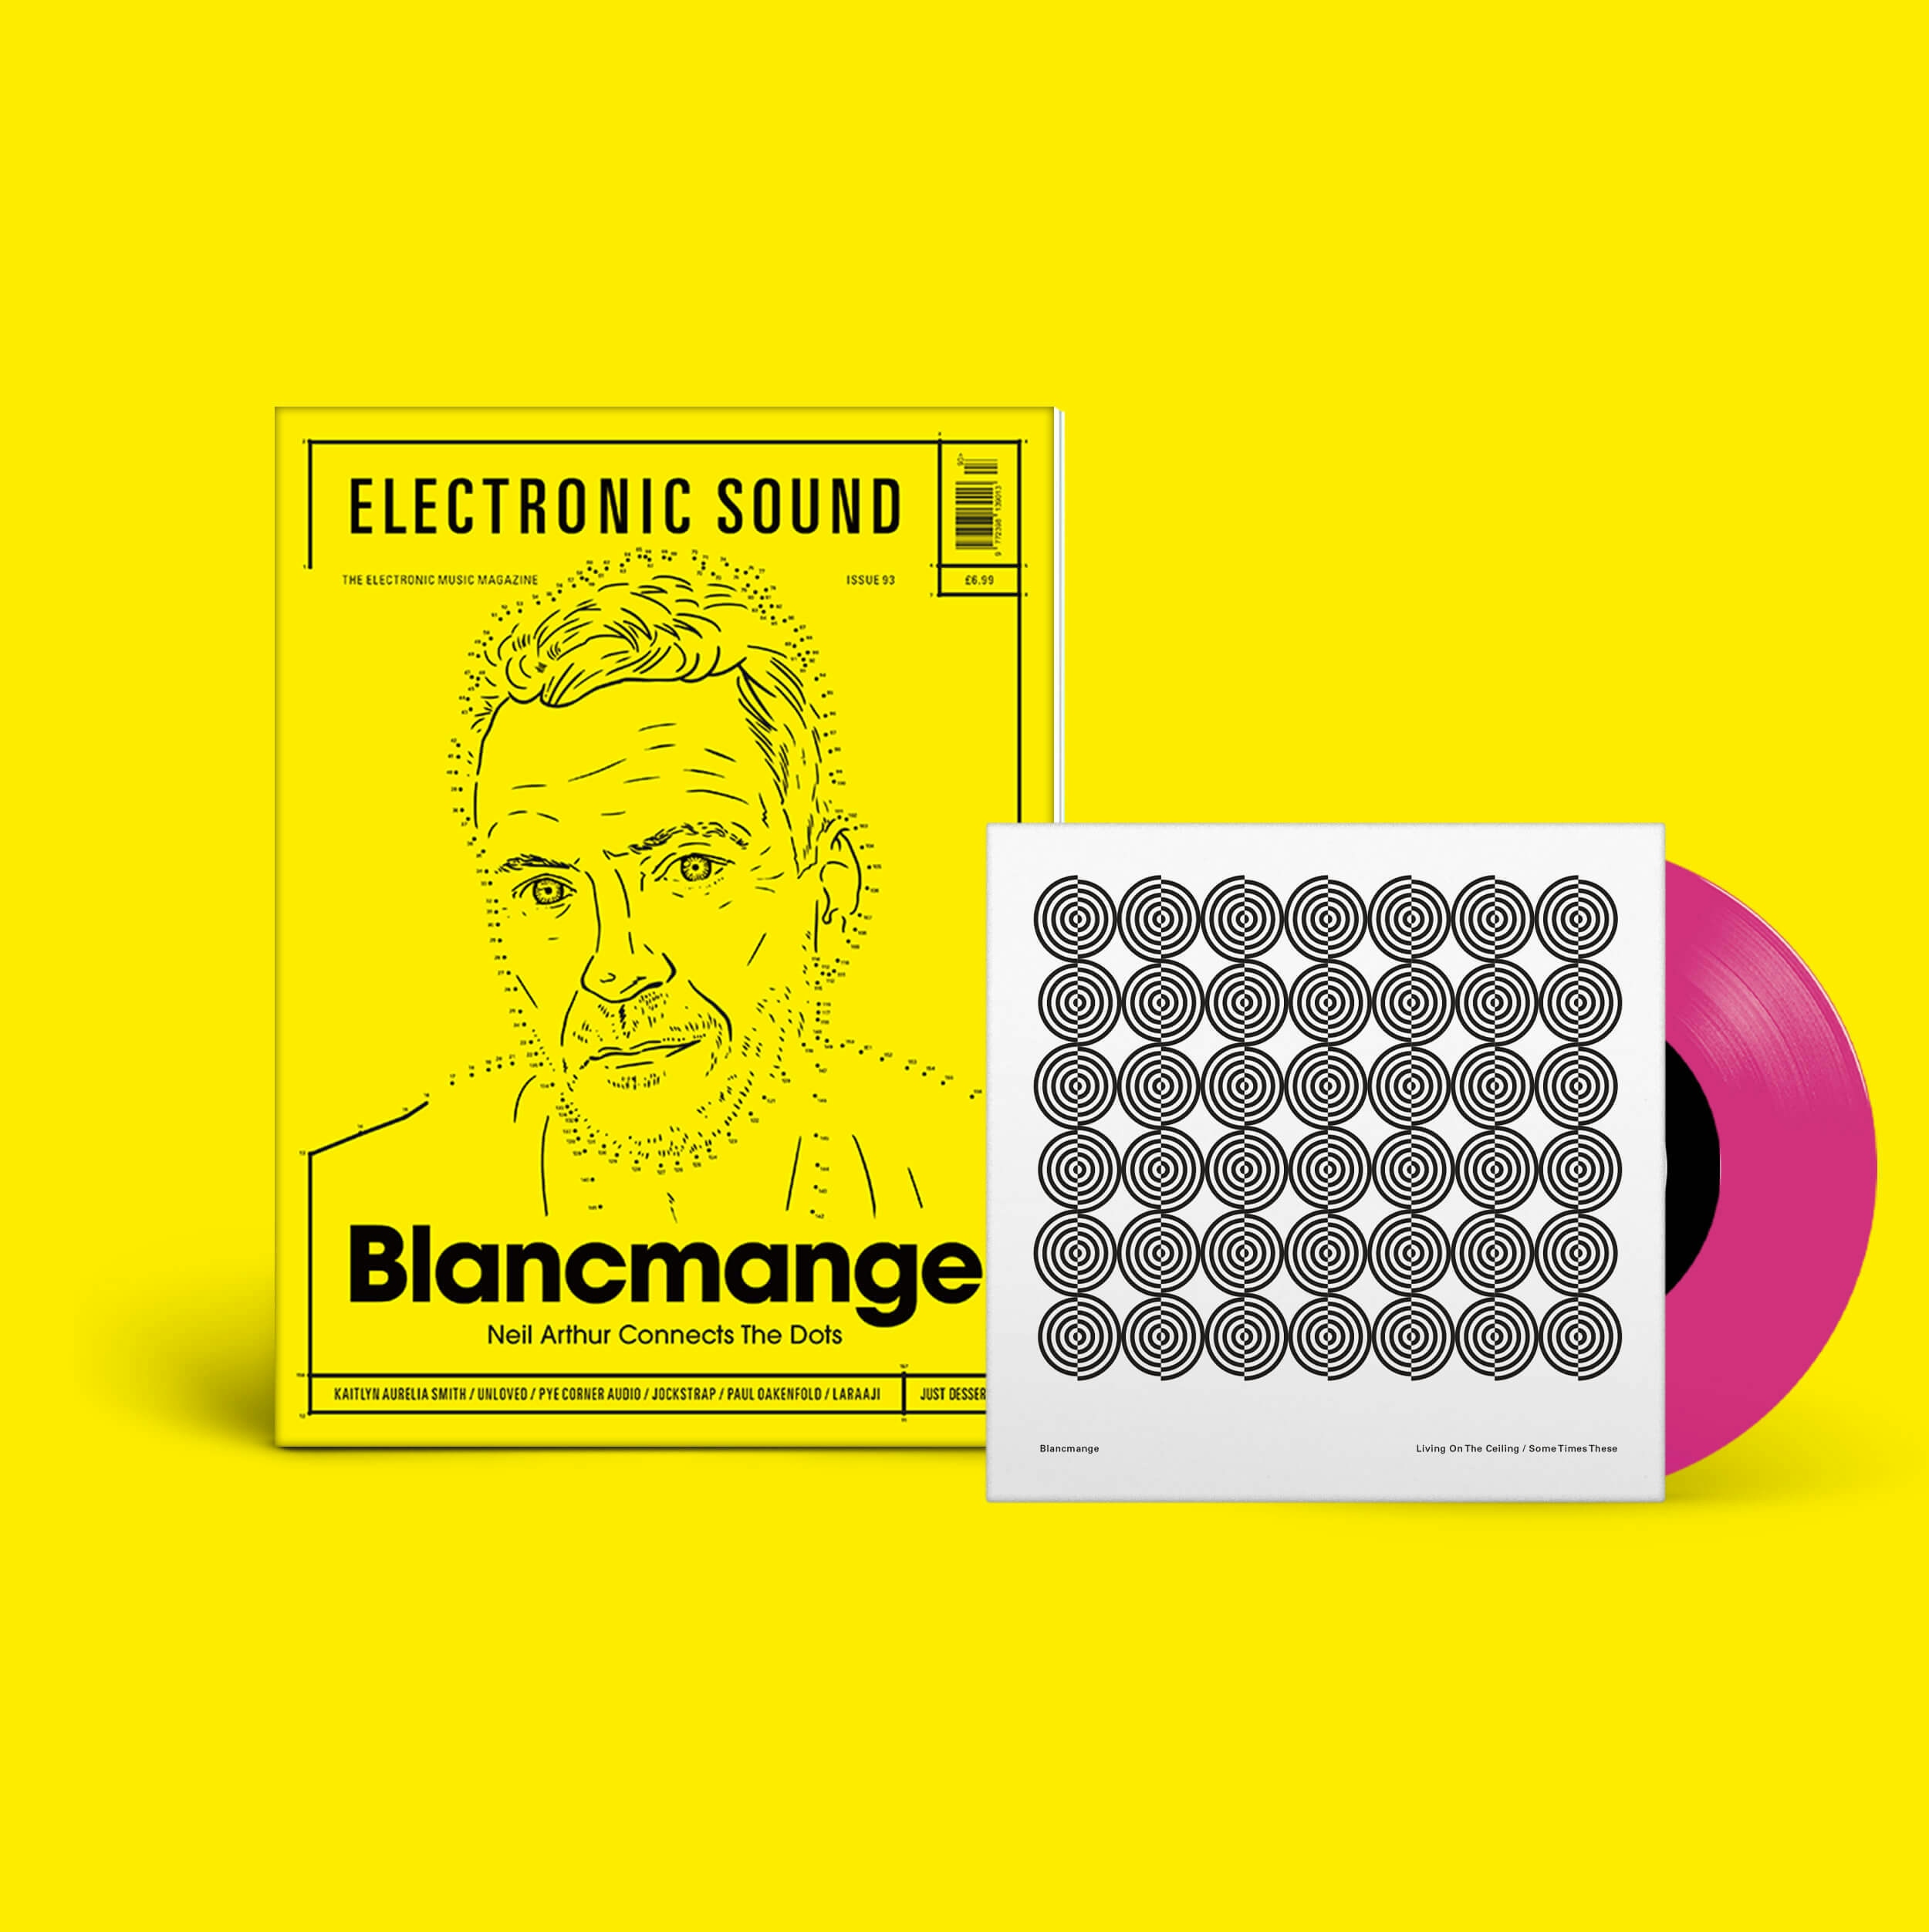 Album artwork for Album artwork for Issue 93 with Blancmange 7" by Electronic Sound by Issue 93 with Blancmange 7" - Electronic Sound